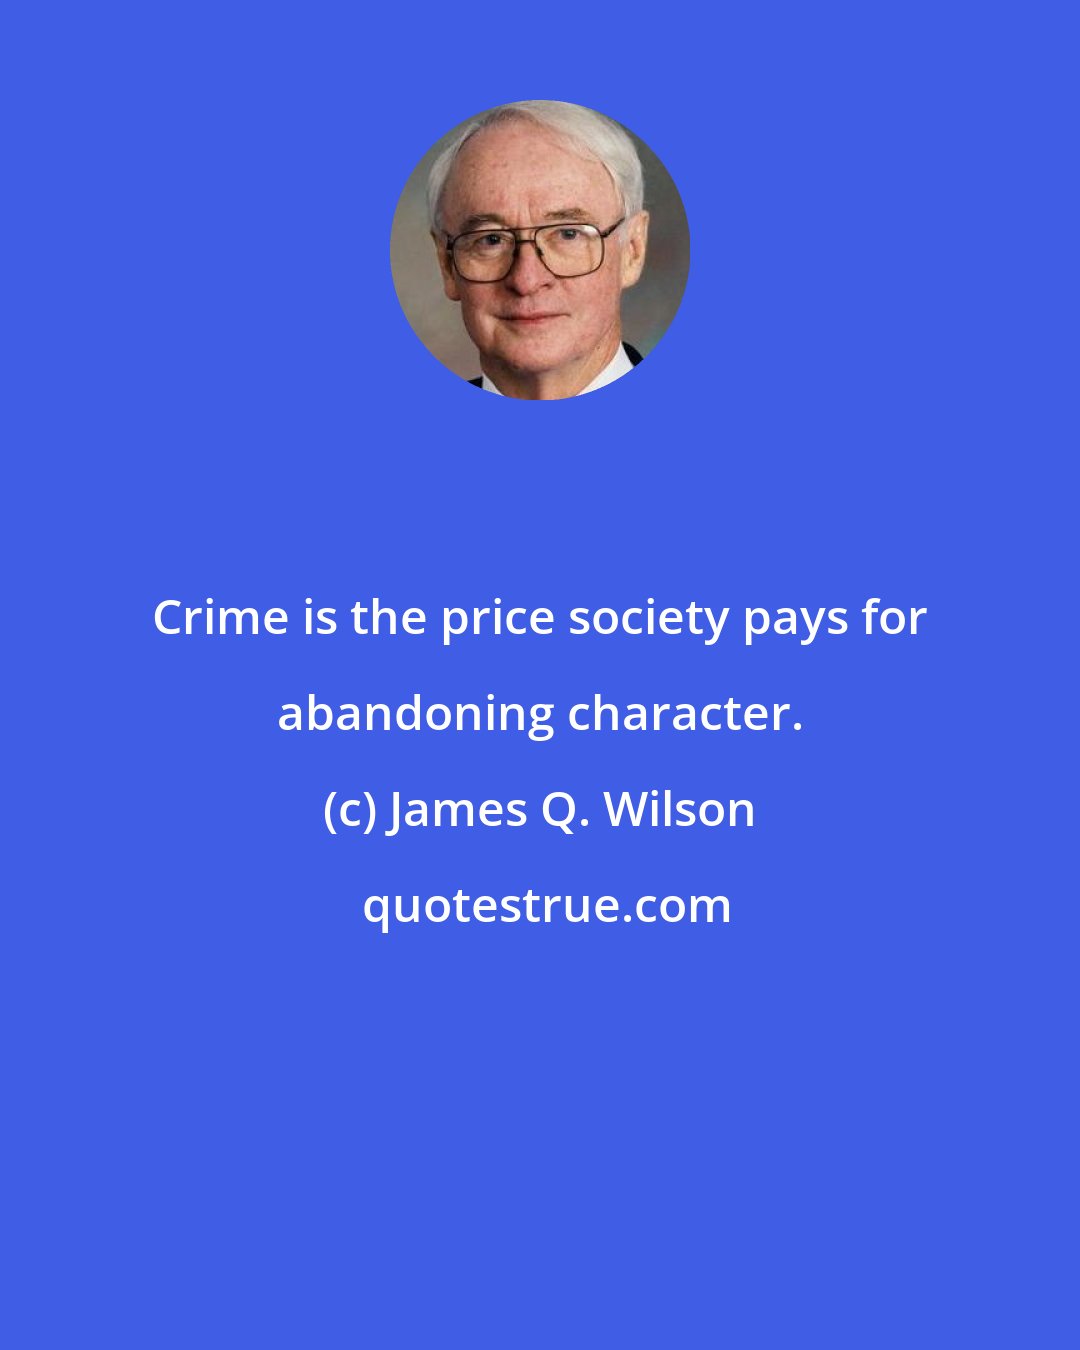 James Q. Wilson: Crime is the price society pays for abandoning character.